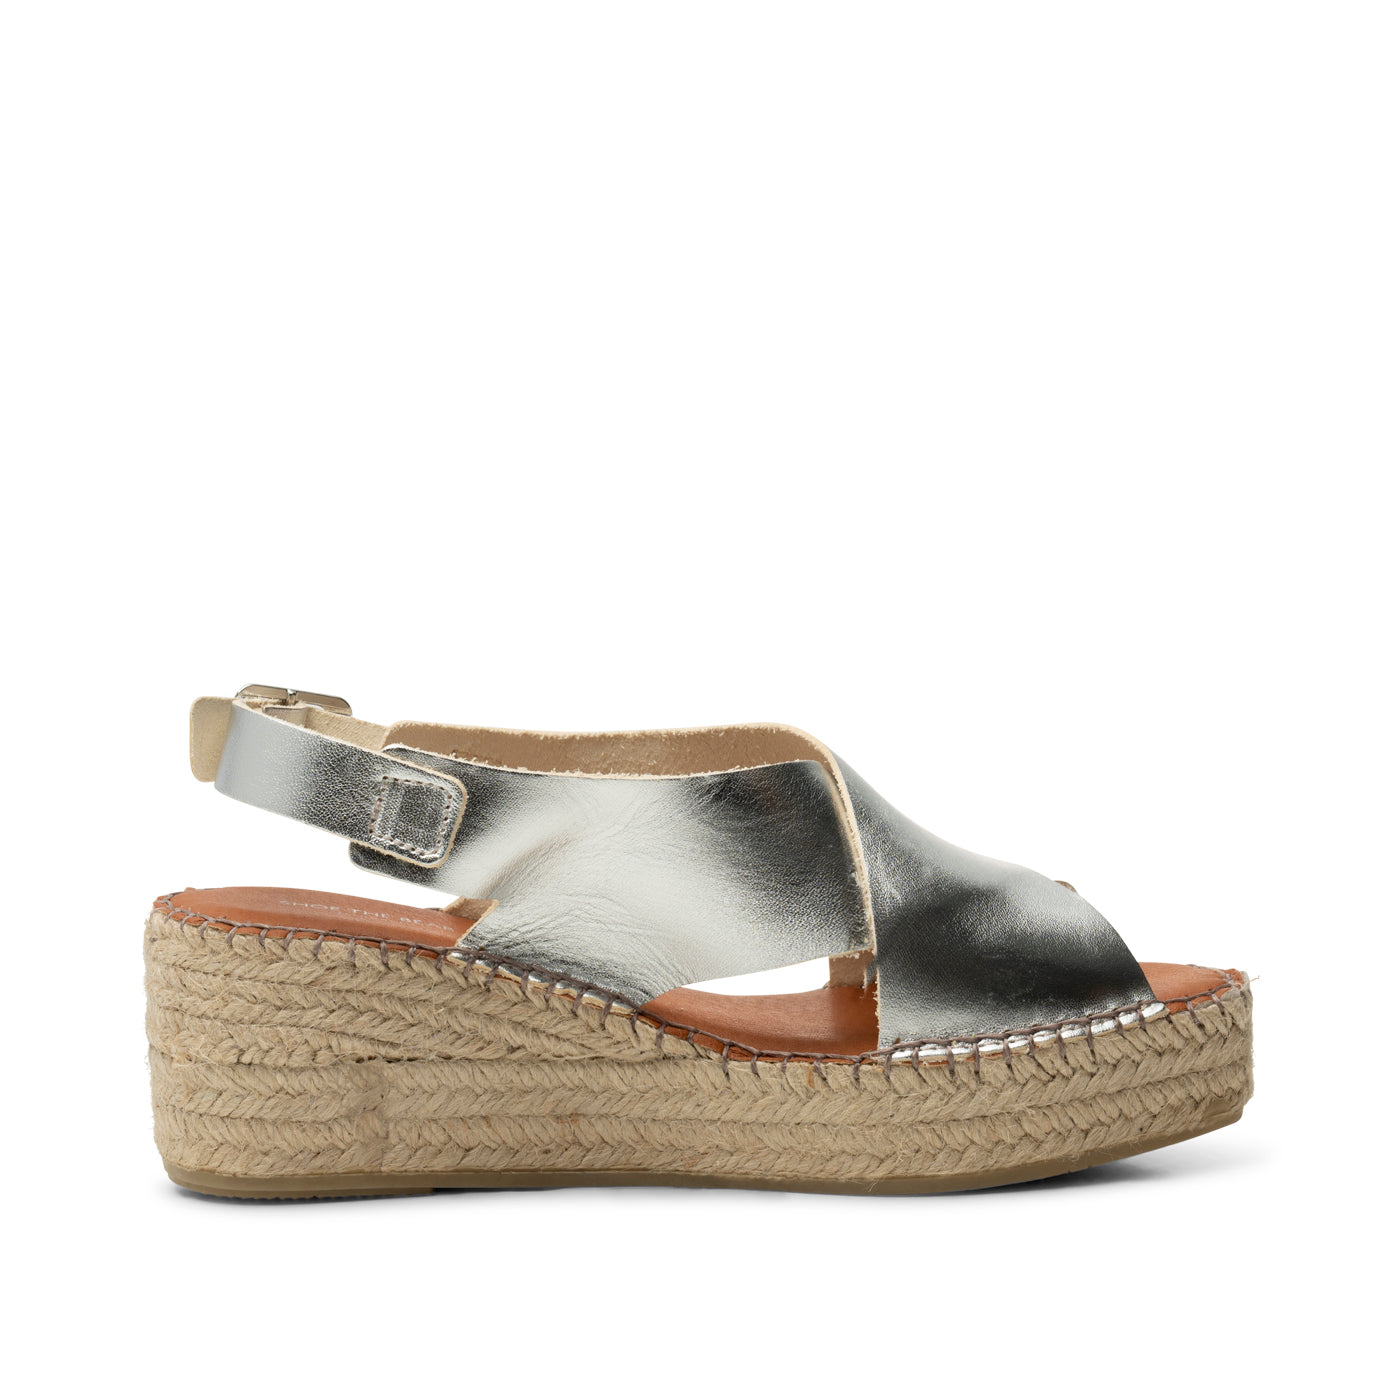 SHOE THE BEAR WOMENS Orchid wedge leather Espadrilles 210 SILVER